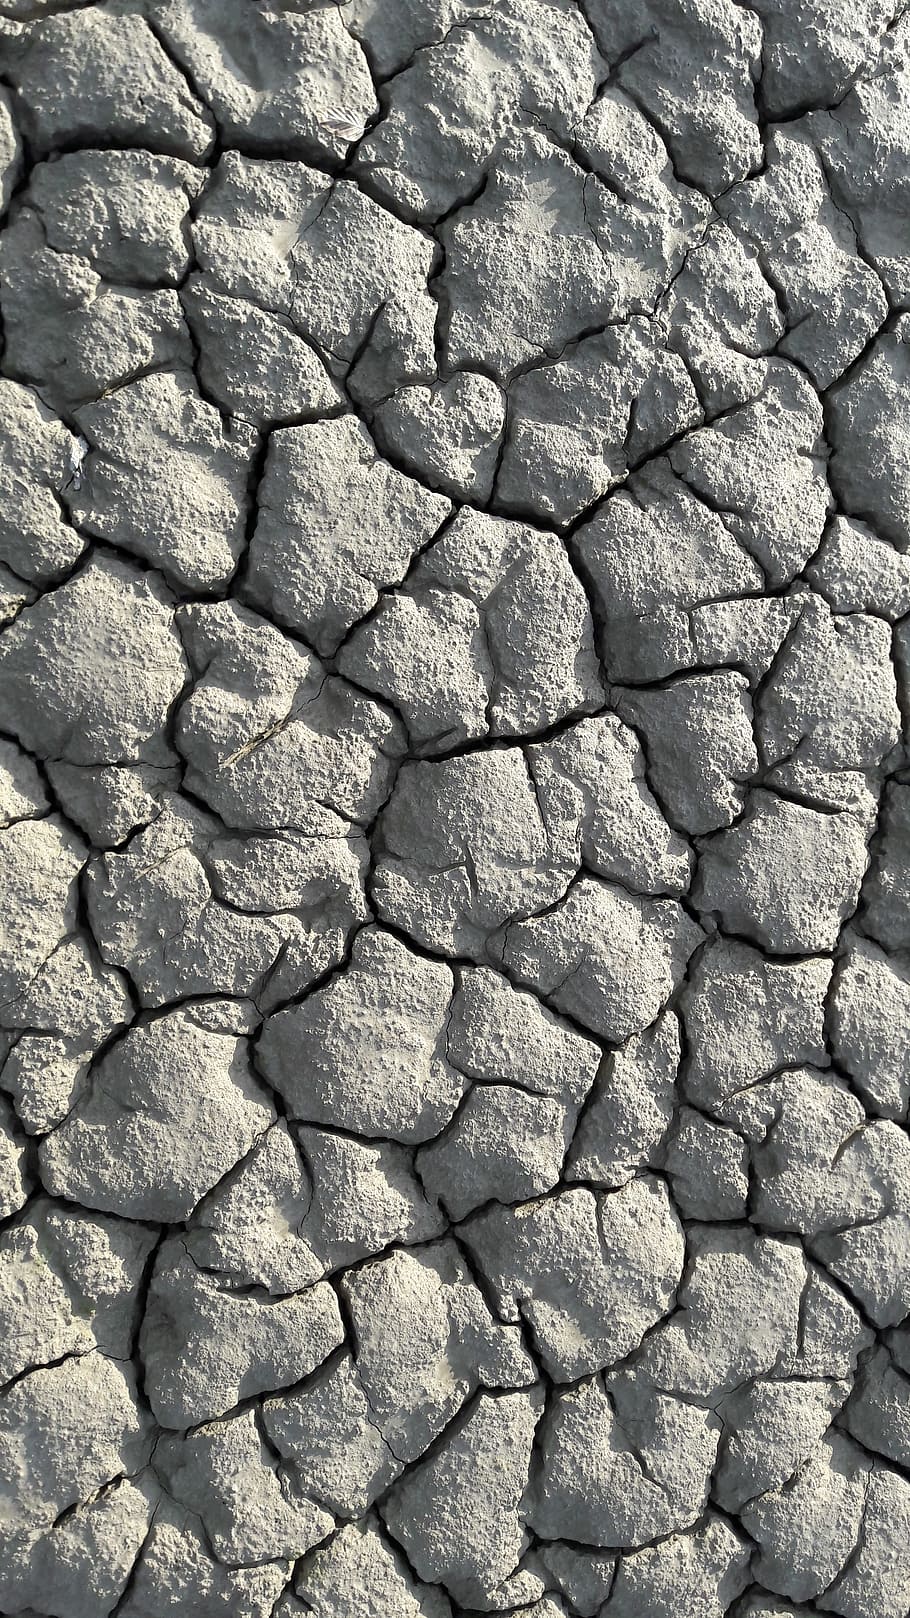 mud, dehydrated, drought, dry soil, clay soil, cracked, structure, ridge, dry, cracks